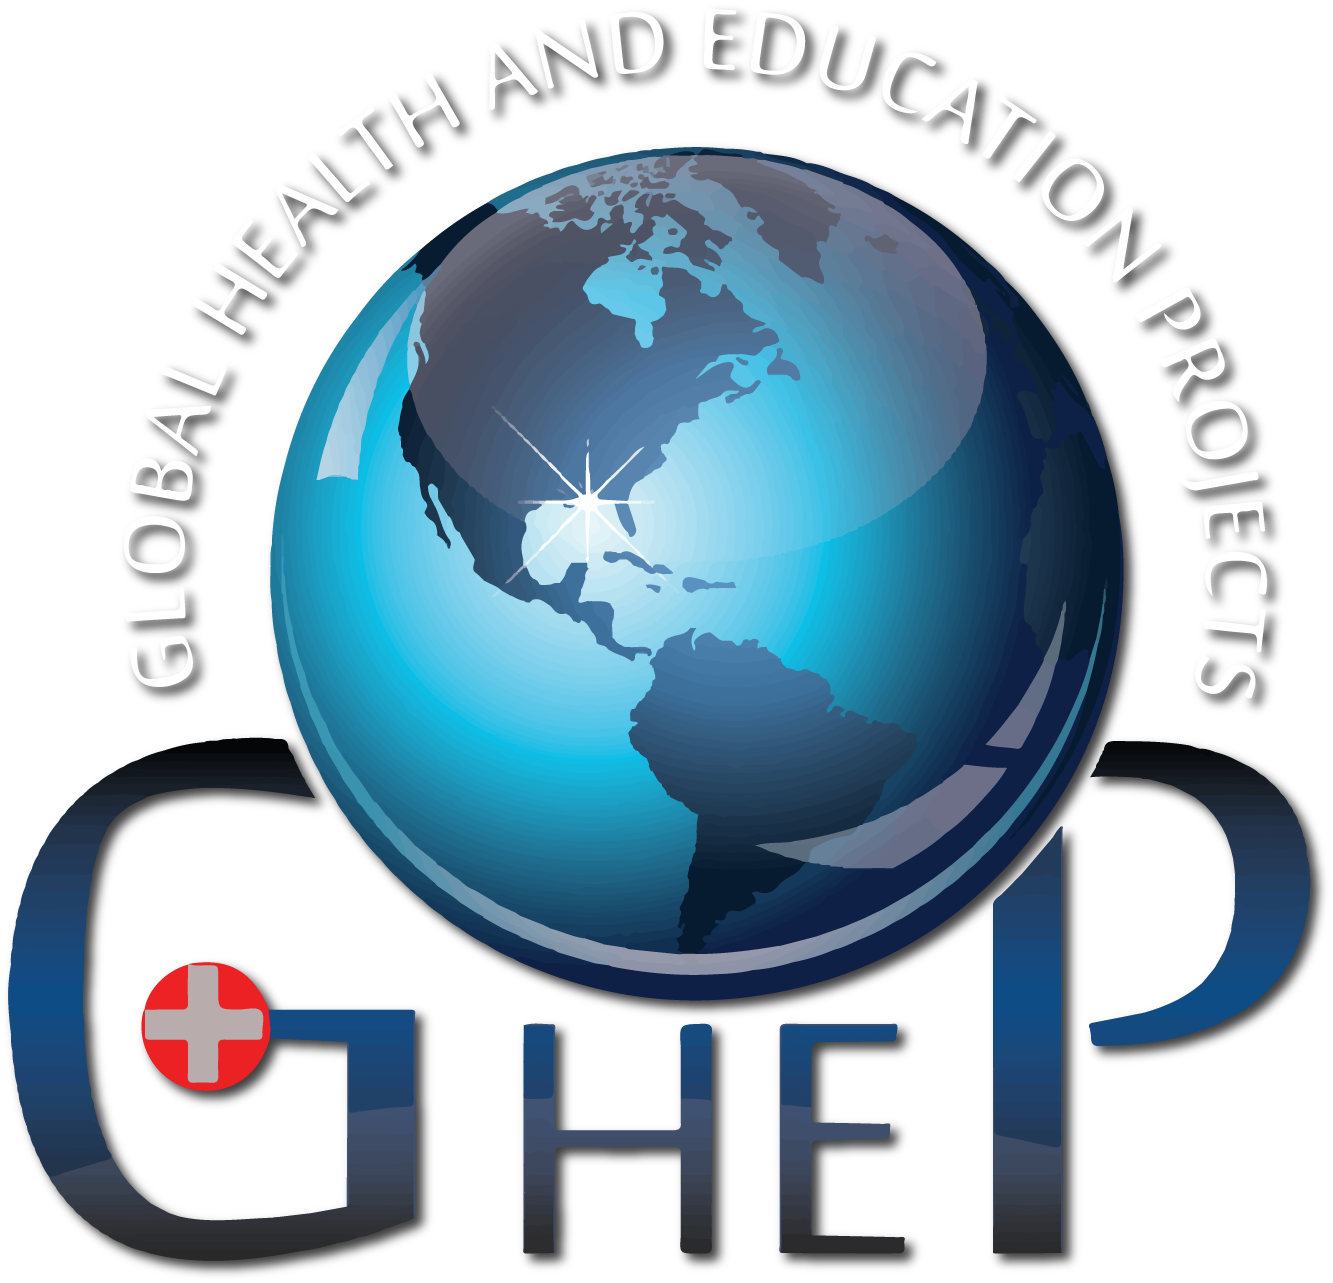 Global Health and Education Projects and Kano Independent Research Centre Trust Sign Strategic Partnership to Support Researchers in Africa